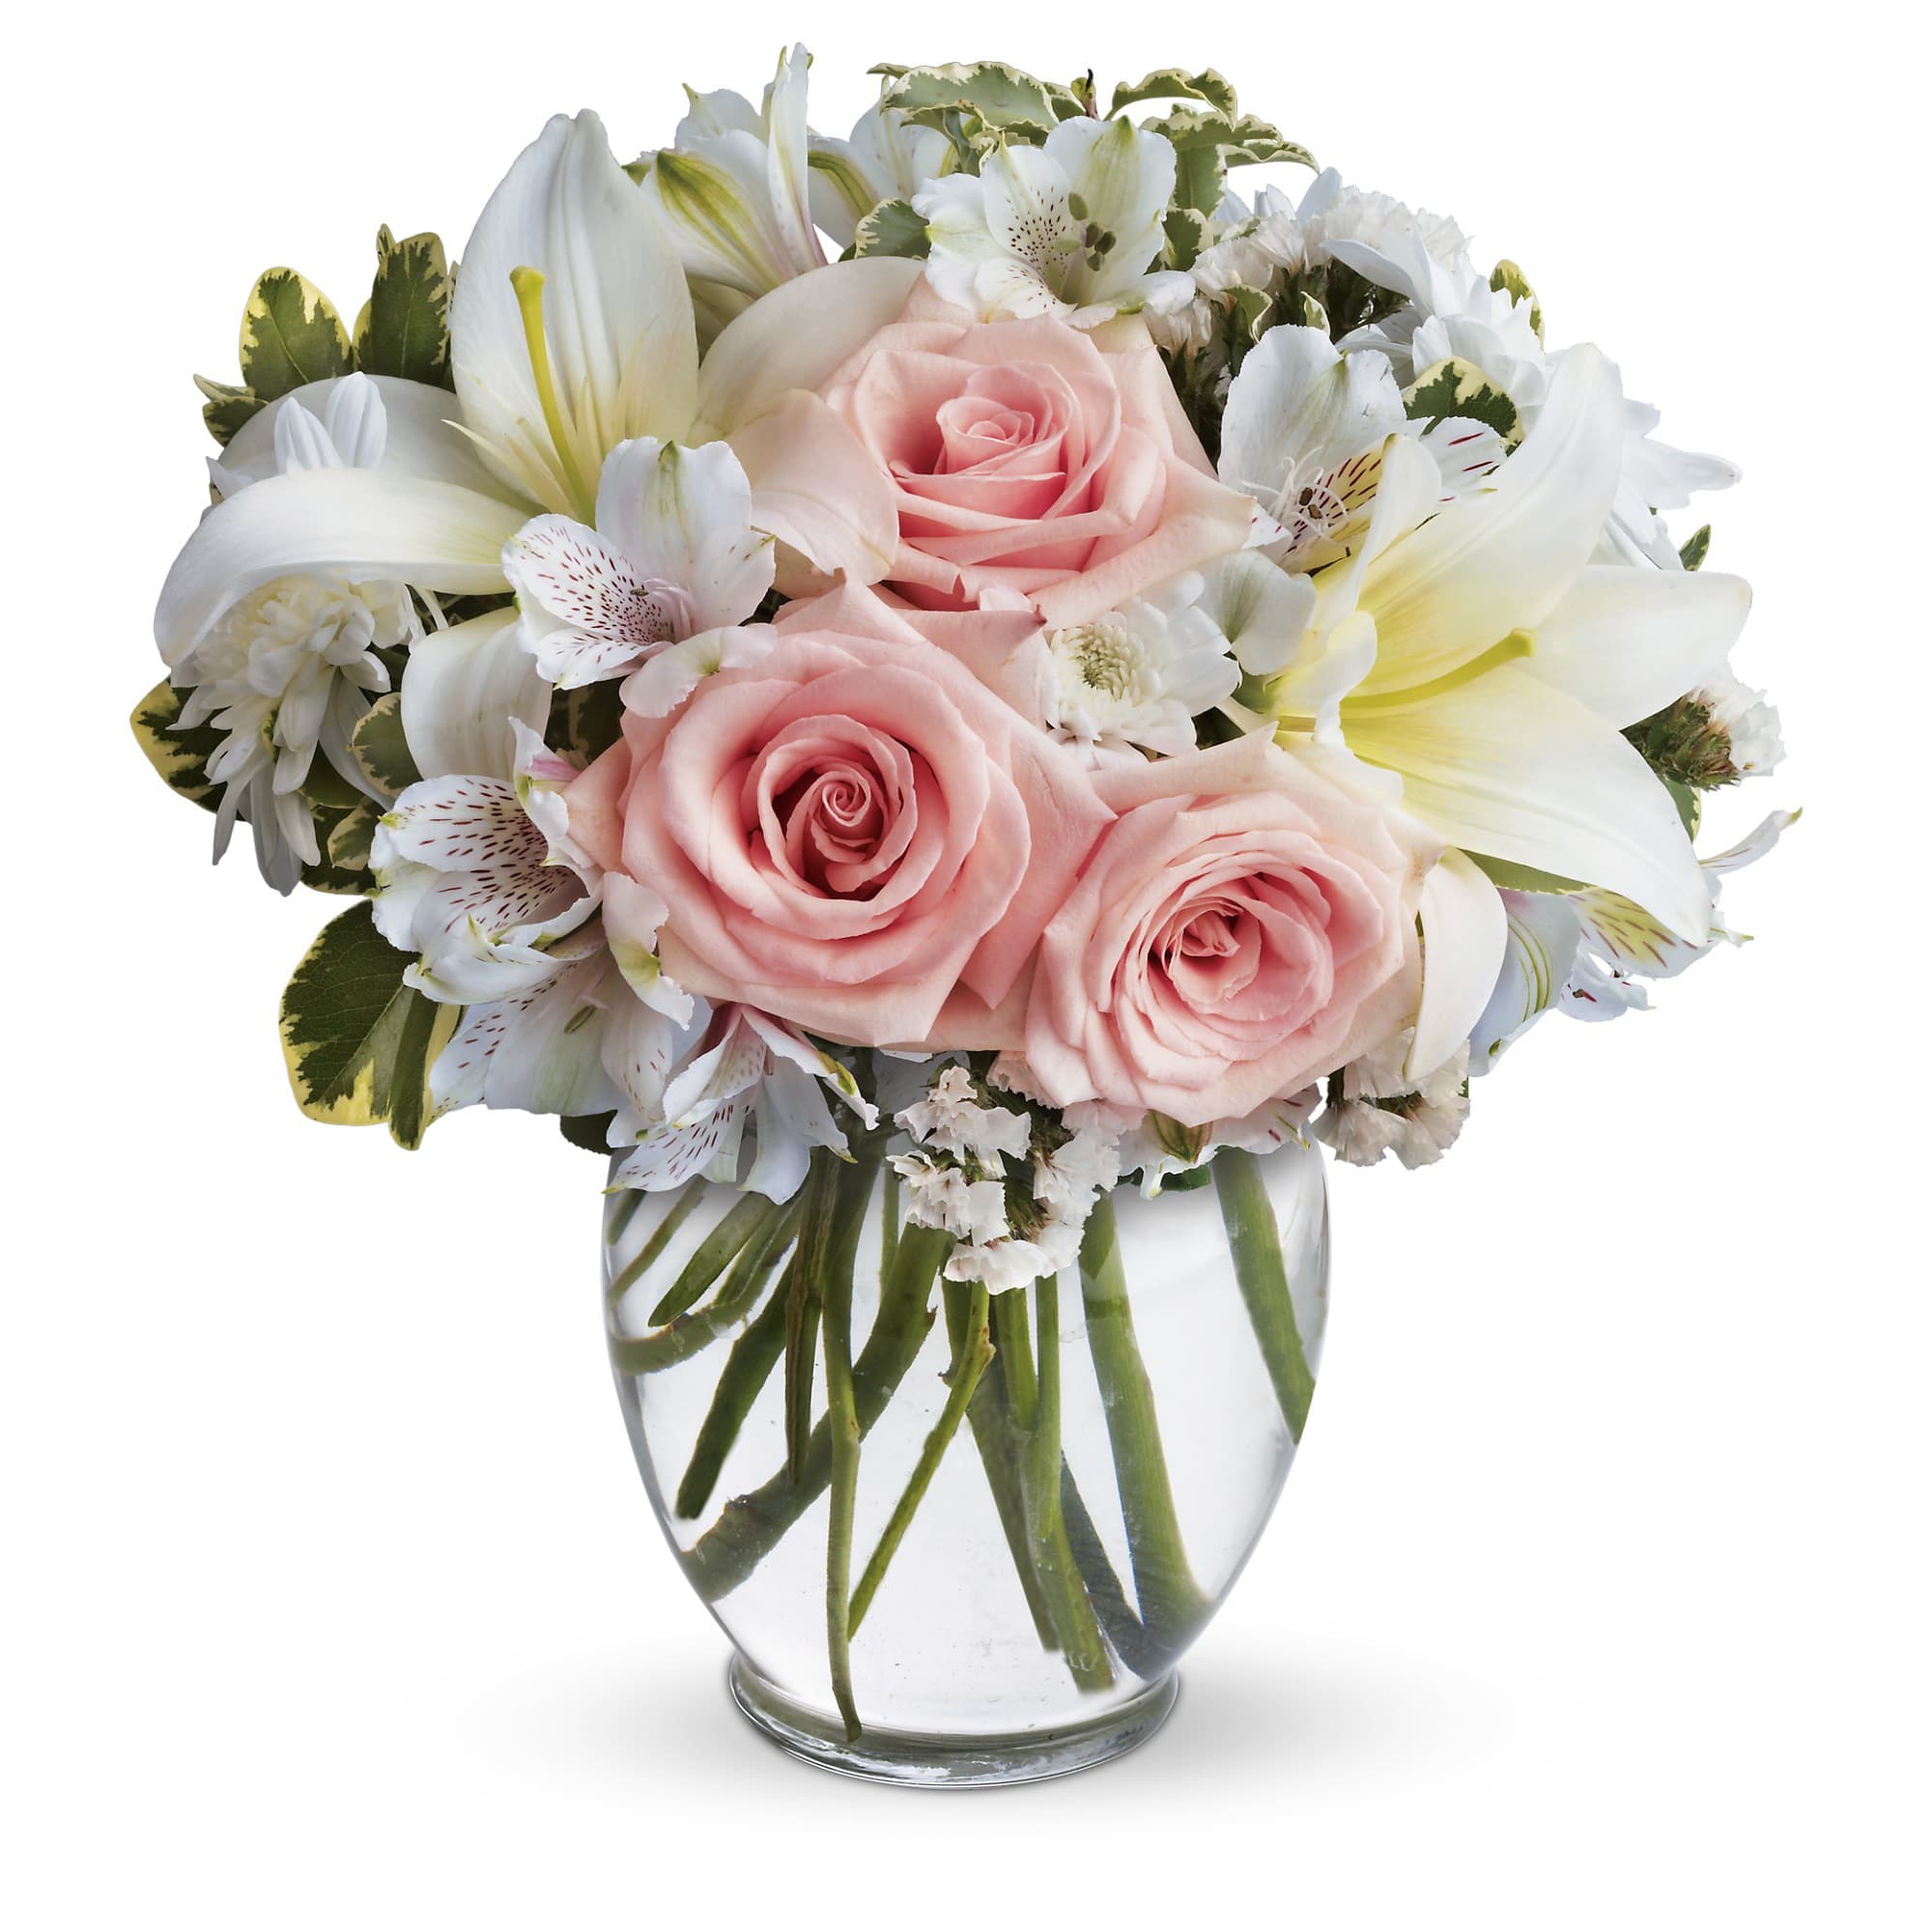 Arrive in Style by Teleflora - This beautiful bouquet will most certainly arrive in style! Ready for the runway, as it were. A delightful combination of light colors and lovely flowers, it's simply beautiful. 